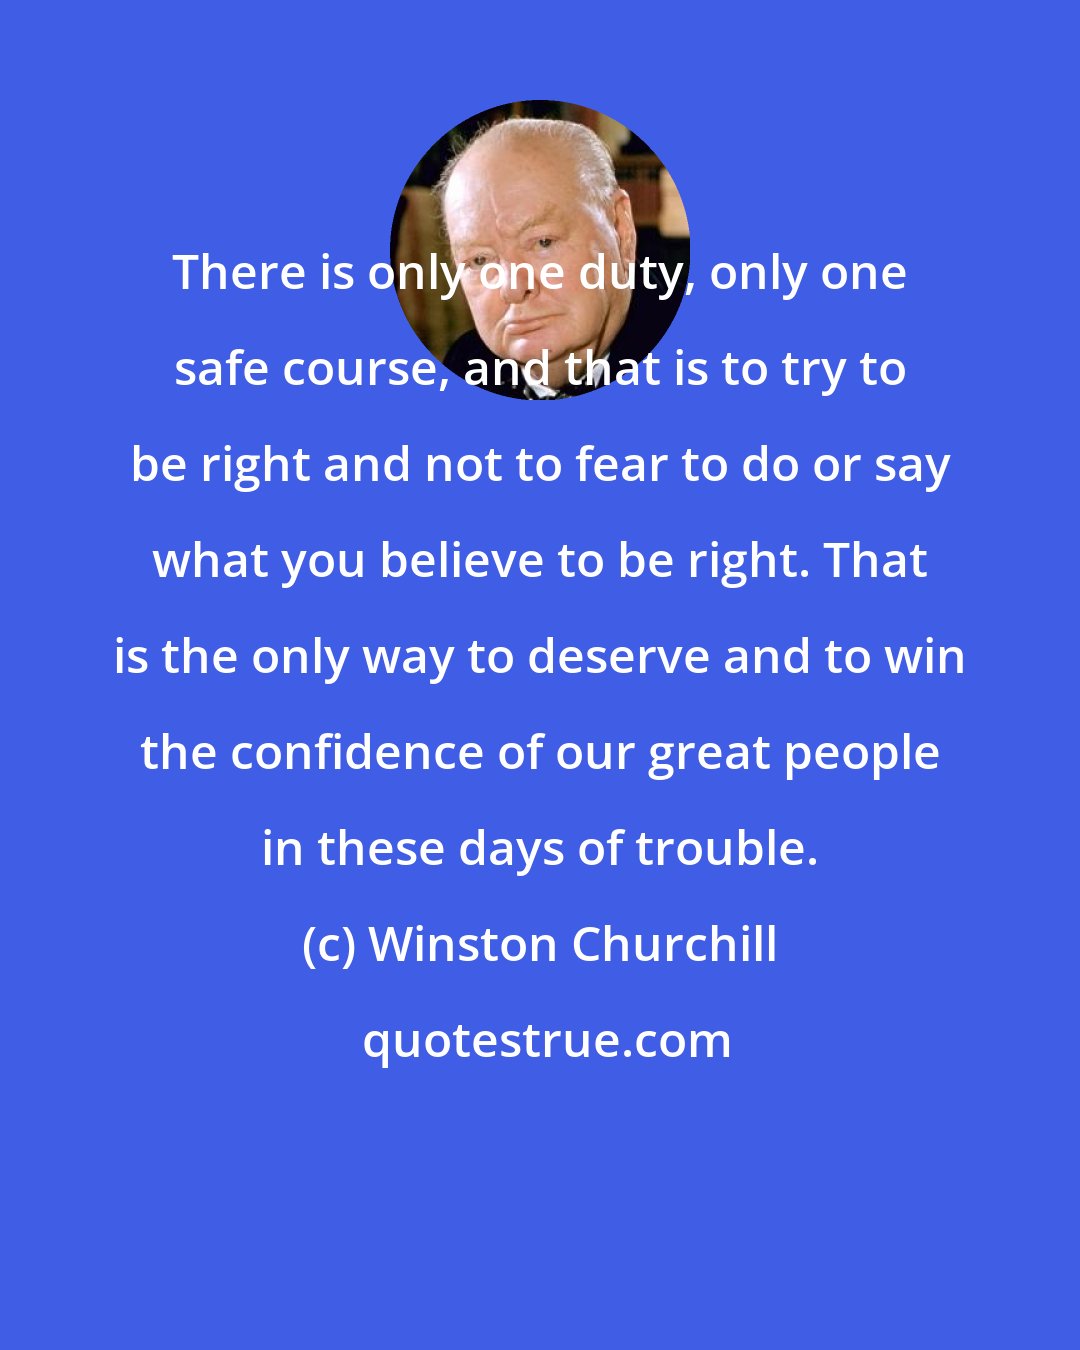 Winston Churchill: There is only one duty, only one safe course, and that is to try to be right and not to fear to do or say what you believe to be right. That is the only way to deserve and to win the confidence of our great people in these days of trouble.